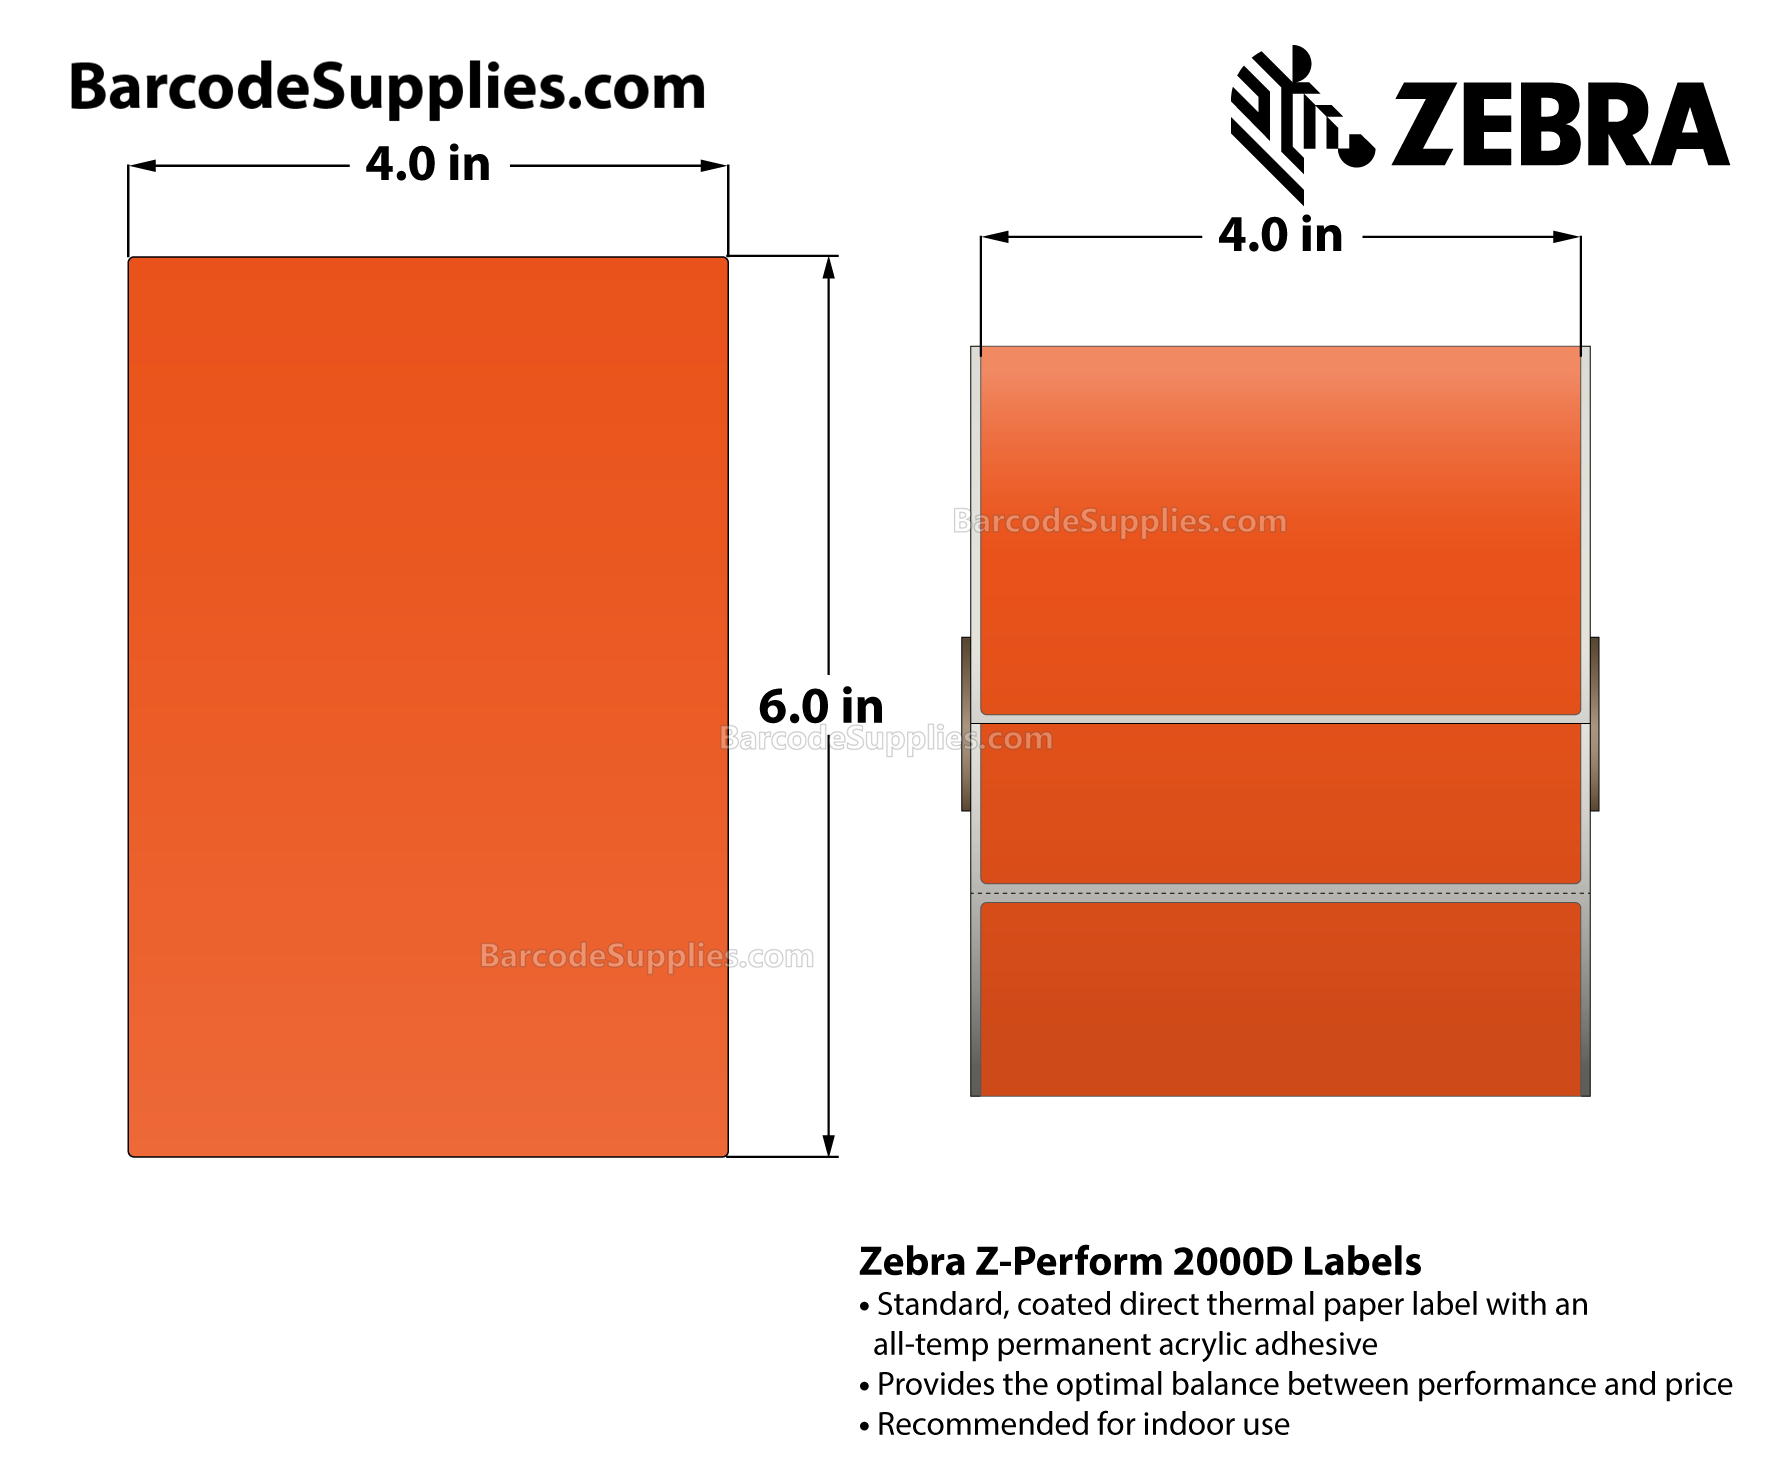 4 x 6 Direct Thermal Orange - PMS 021 Z-Perform 2000D Floodcoated (Orange) Labels With All-Temp Adhesive - Perforated - 430 Labels Per Roll - Carton Of 6 Rolls - 2580 Labels Total - MPN: 10010035-2